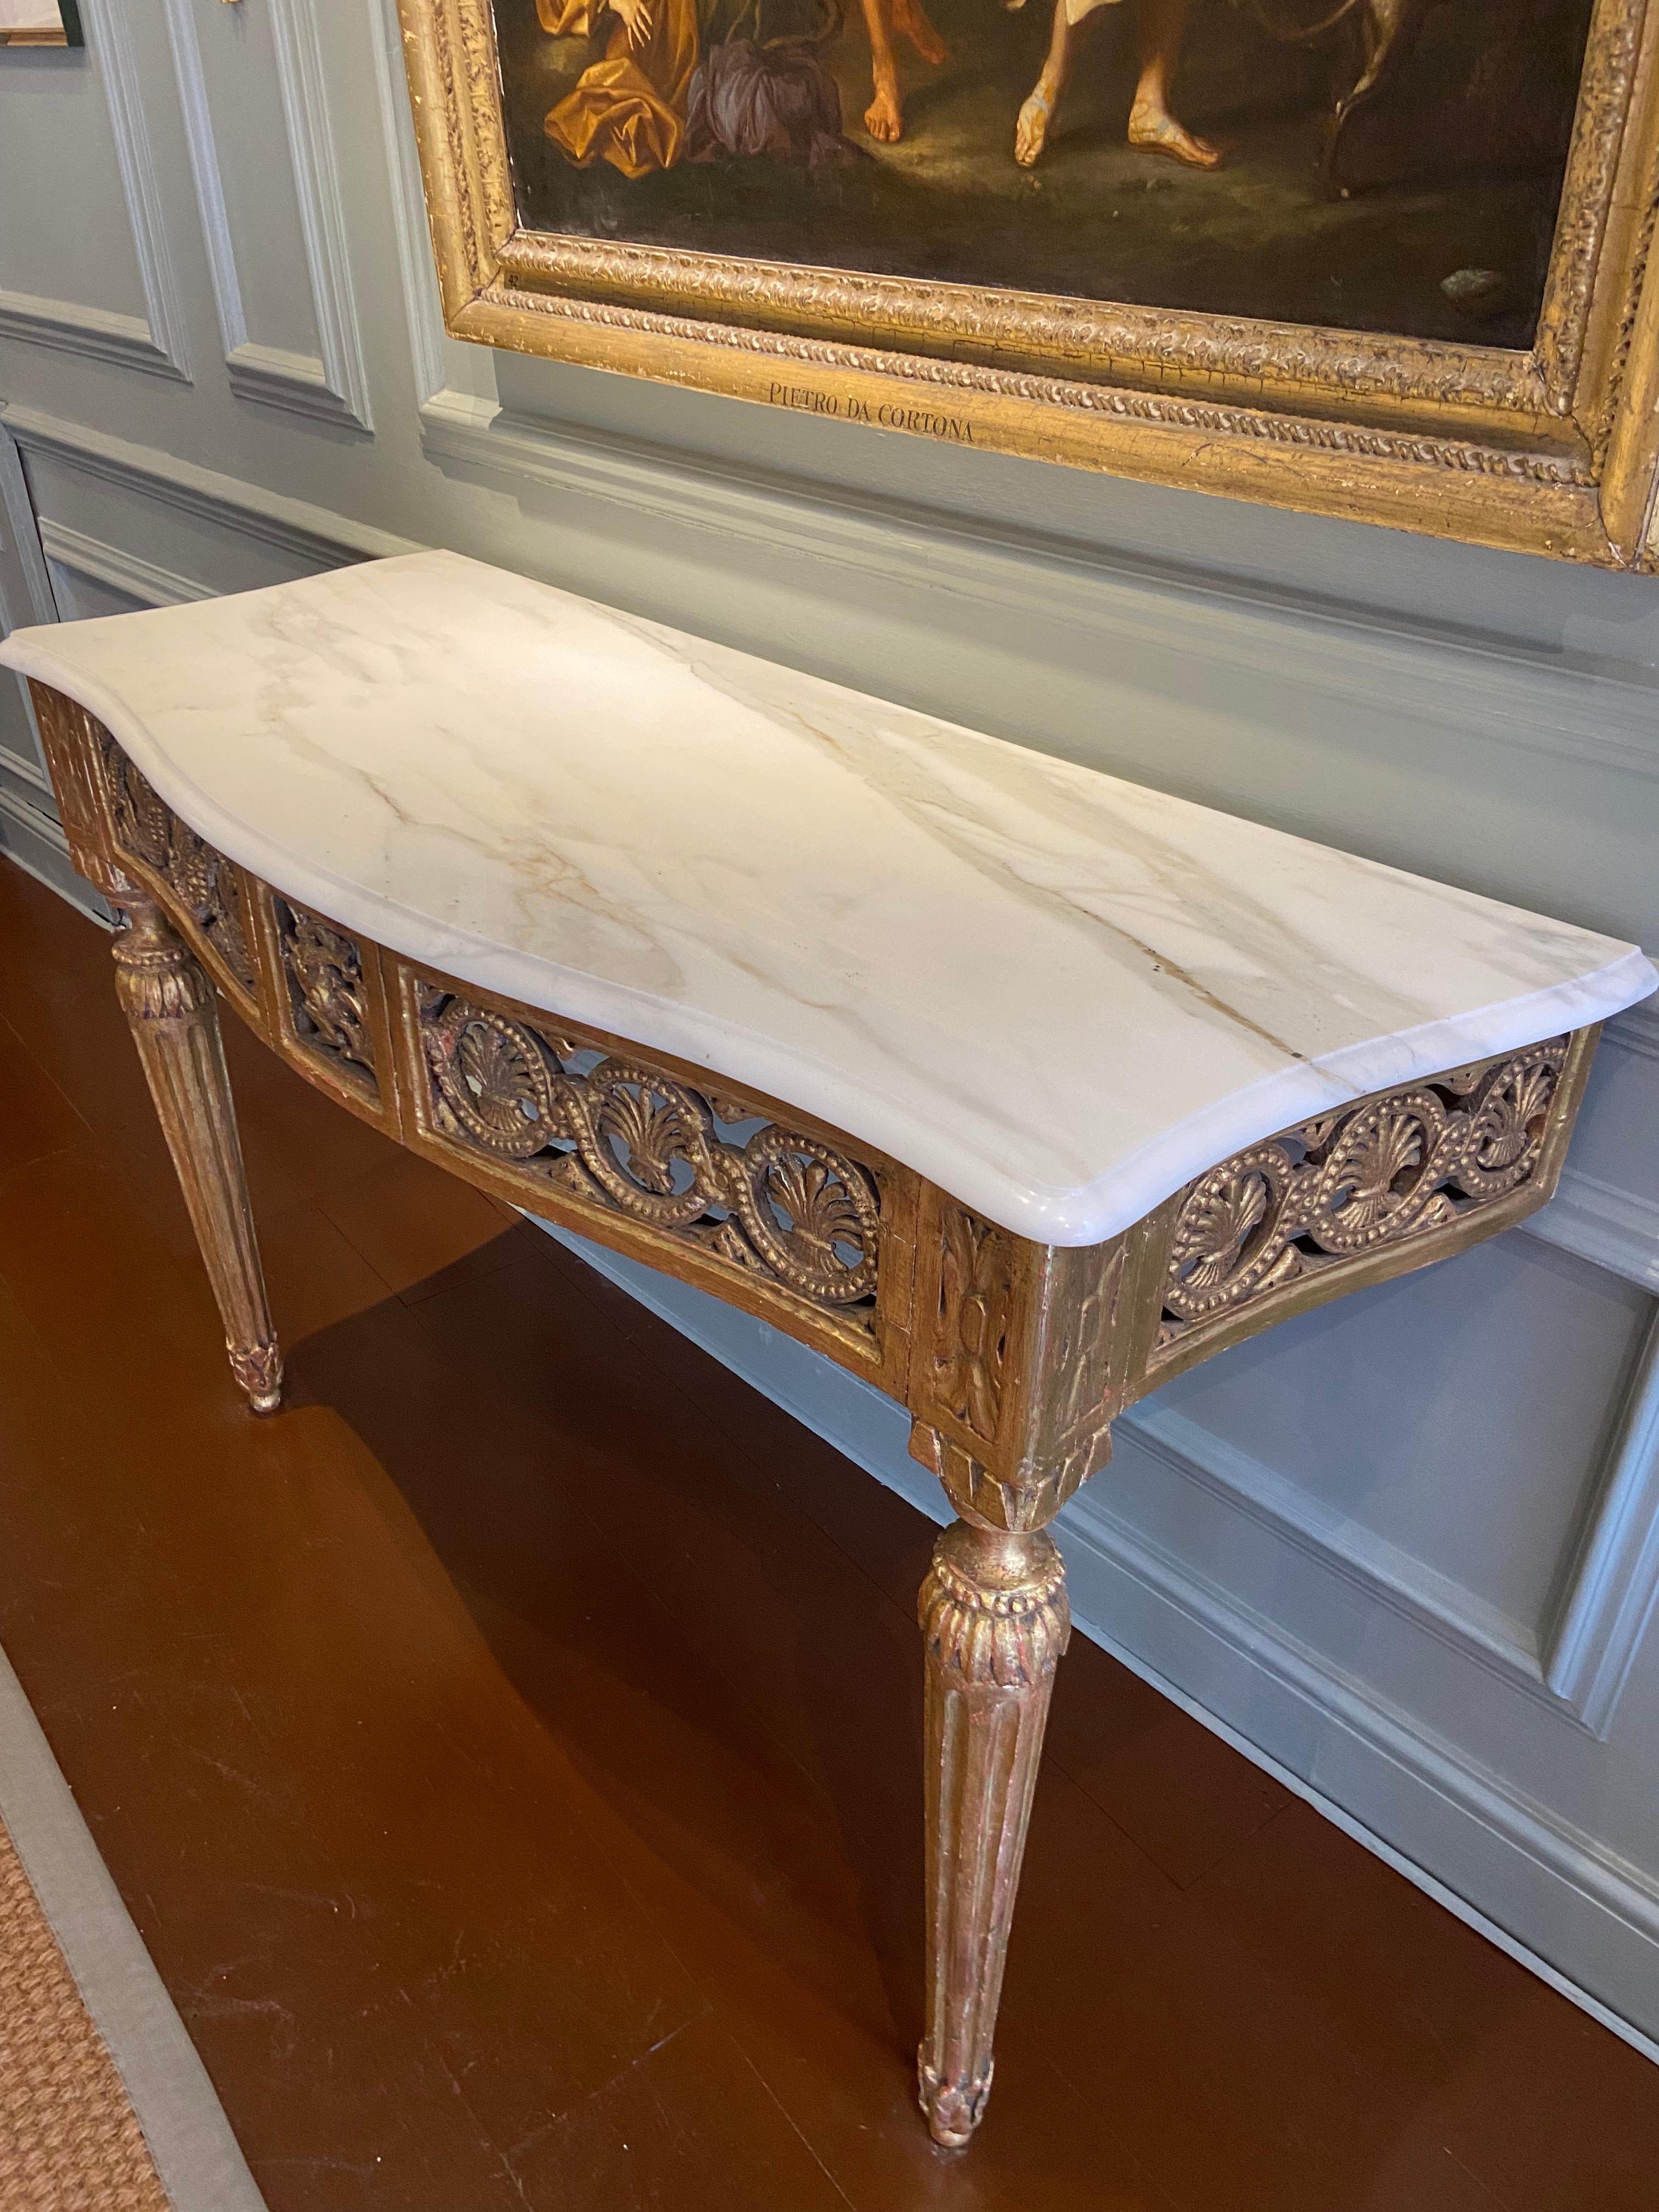 Northern Italian Serpentine Carved Gilt-Wood Console Table 'Late 18th Century' For Sale 6